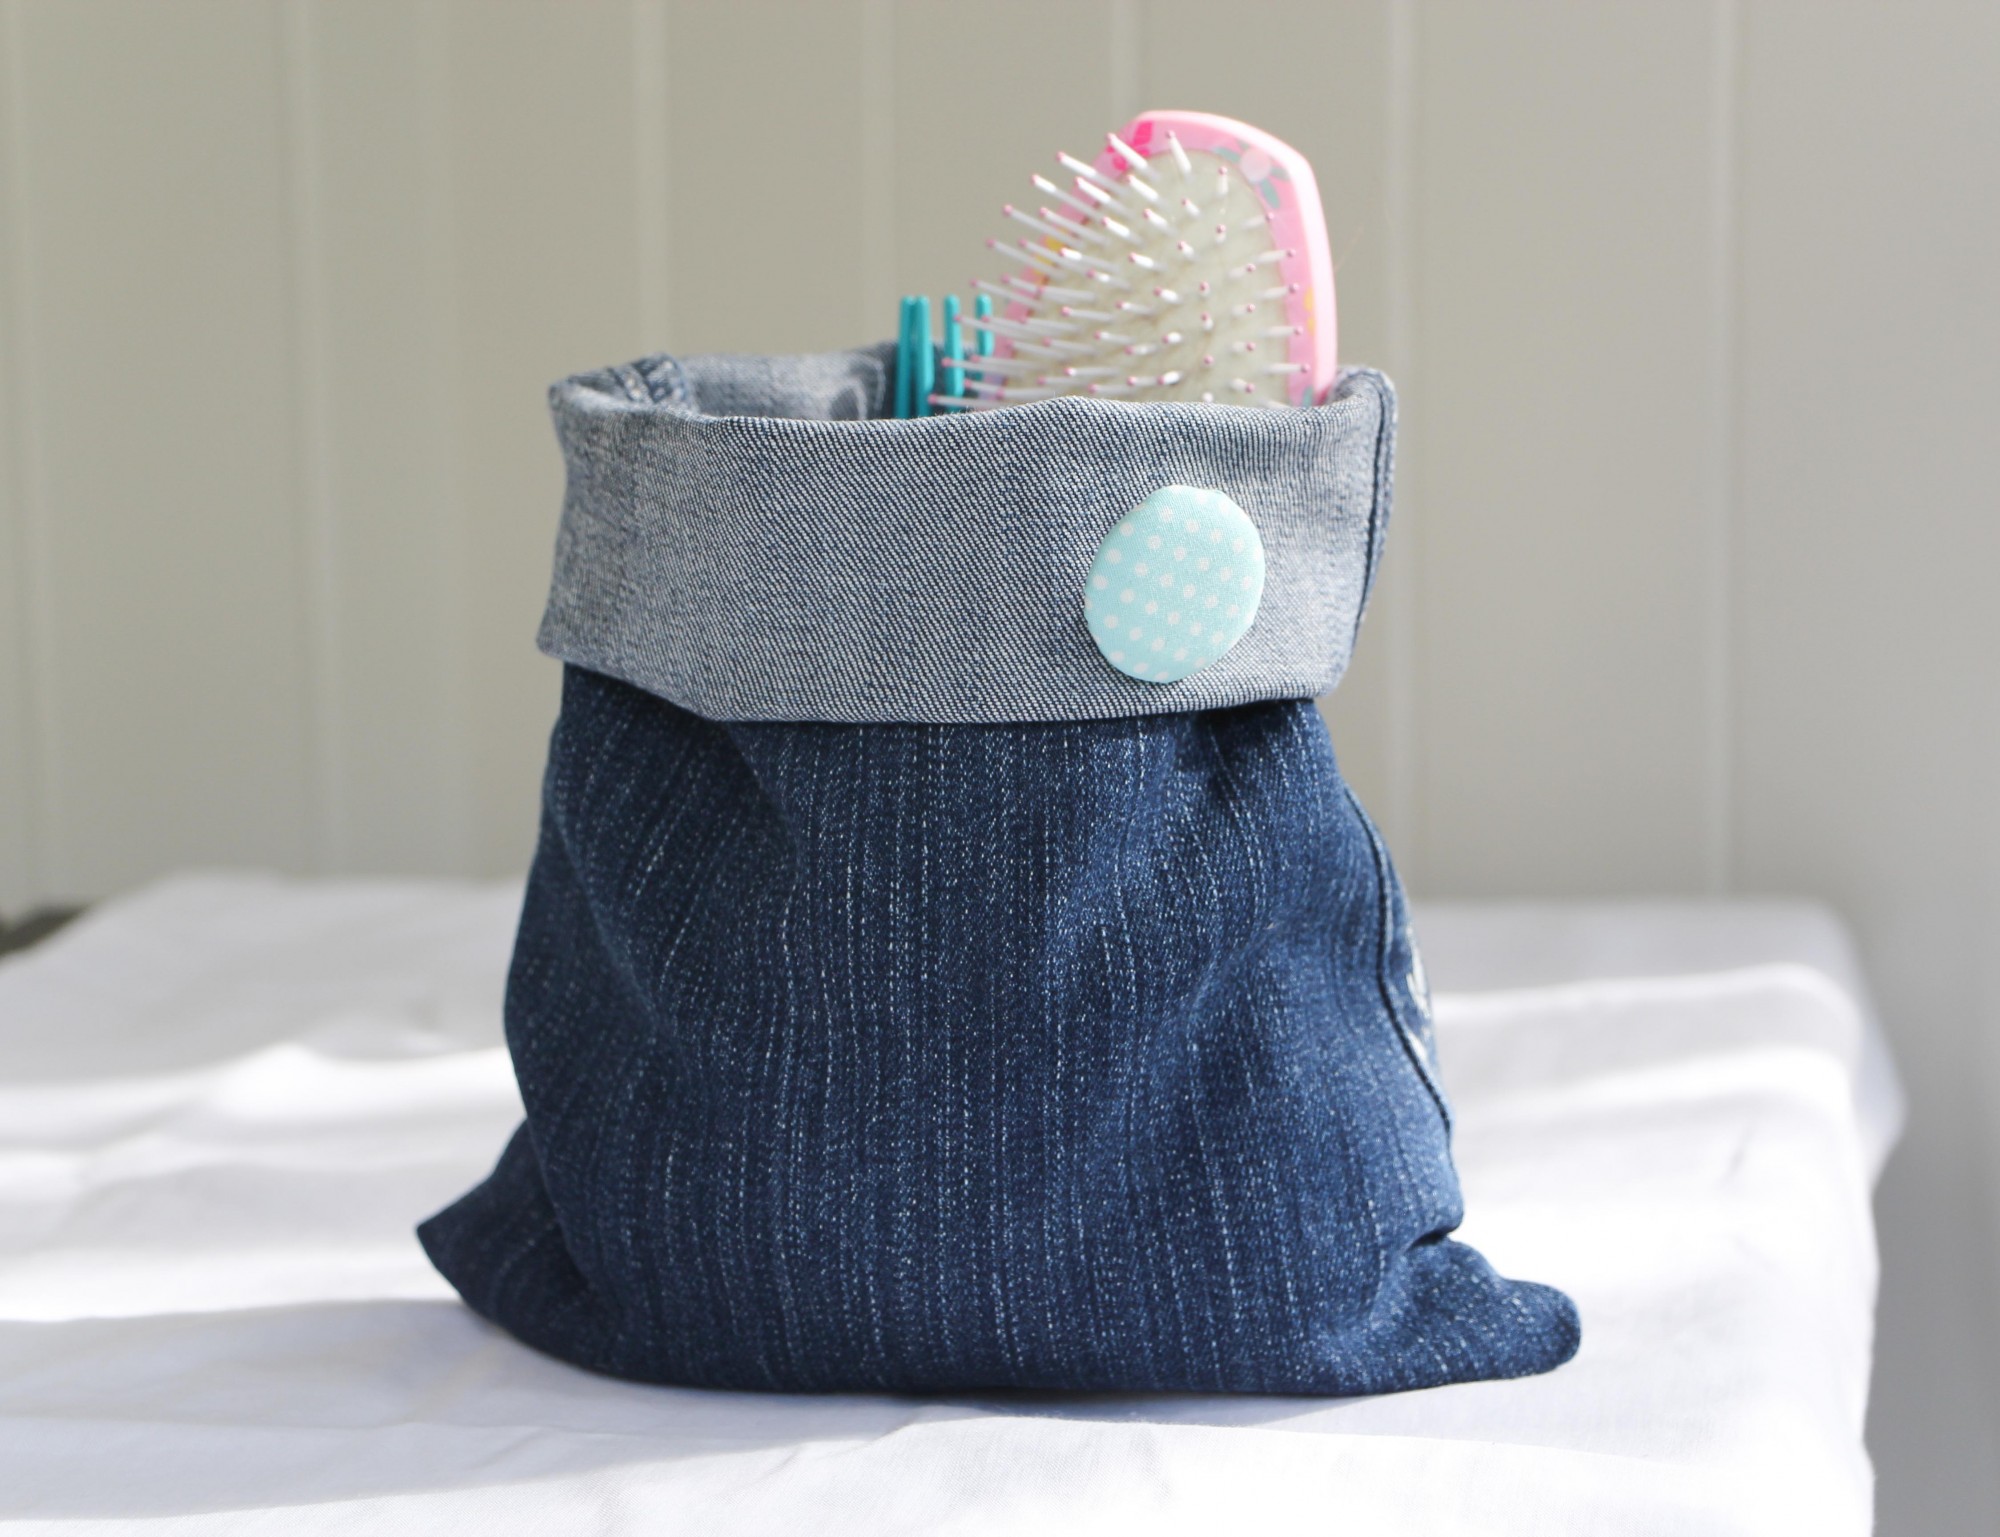 Recycled Denim Craft Ideas – DIY Old Jeans Projects – No1 Phone Case | D4u